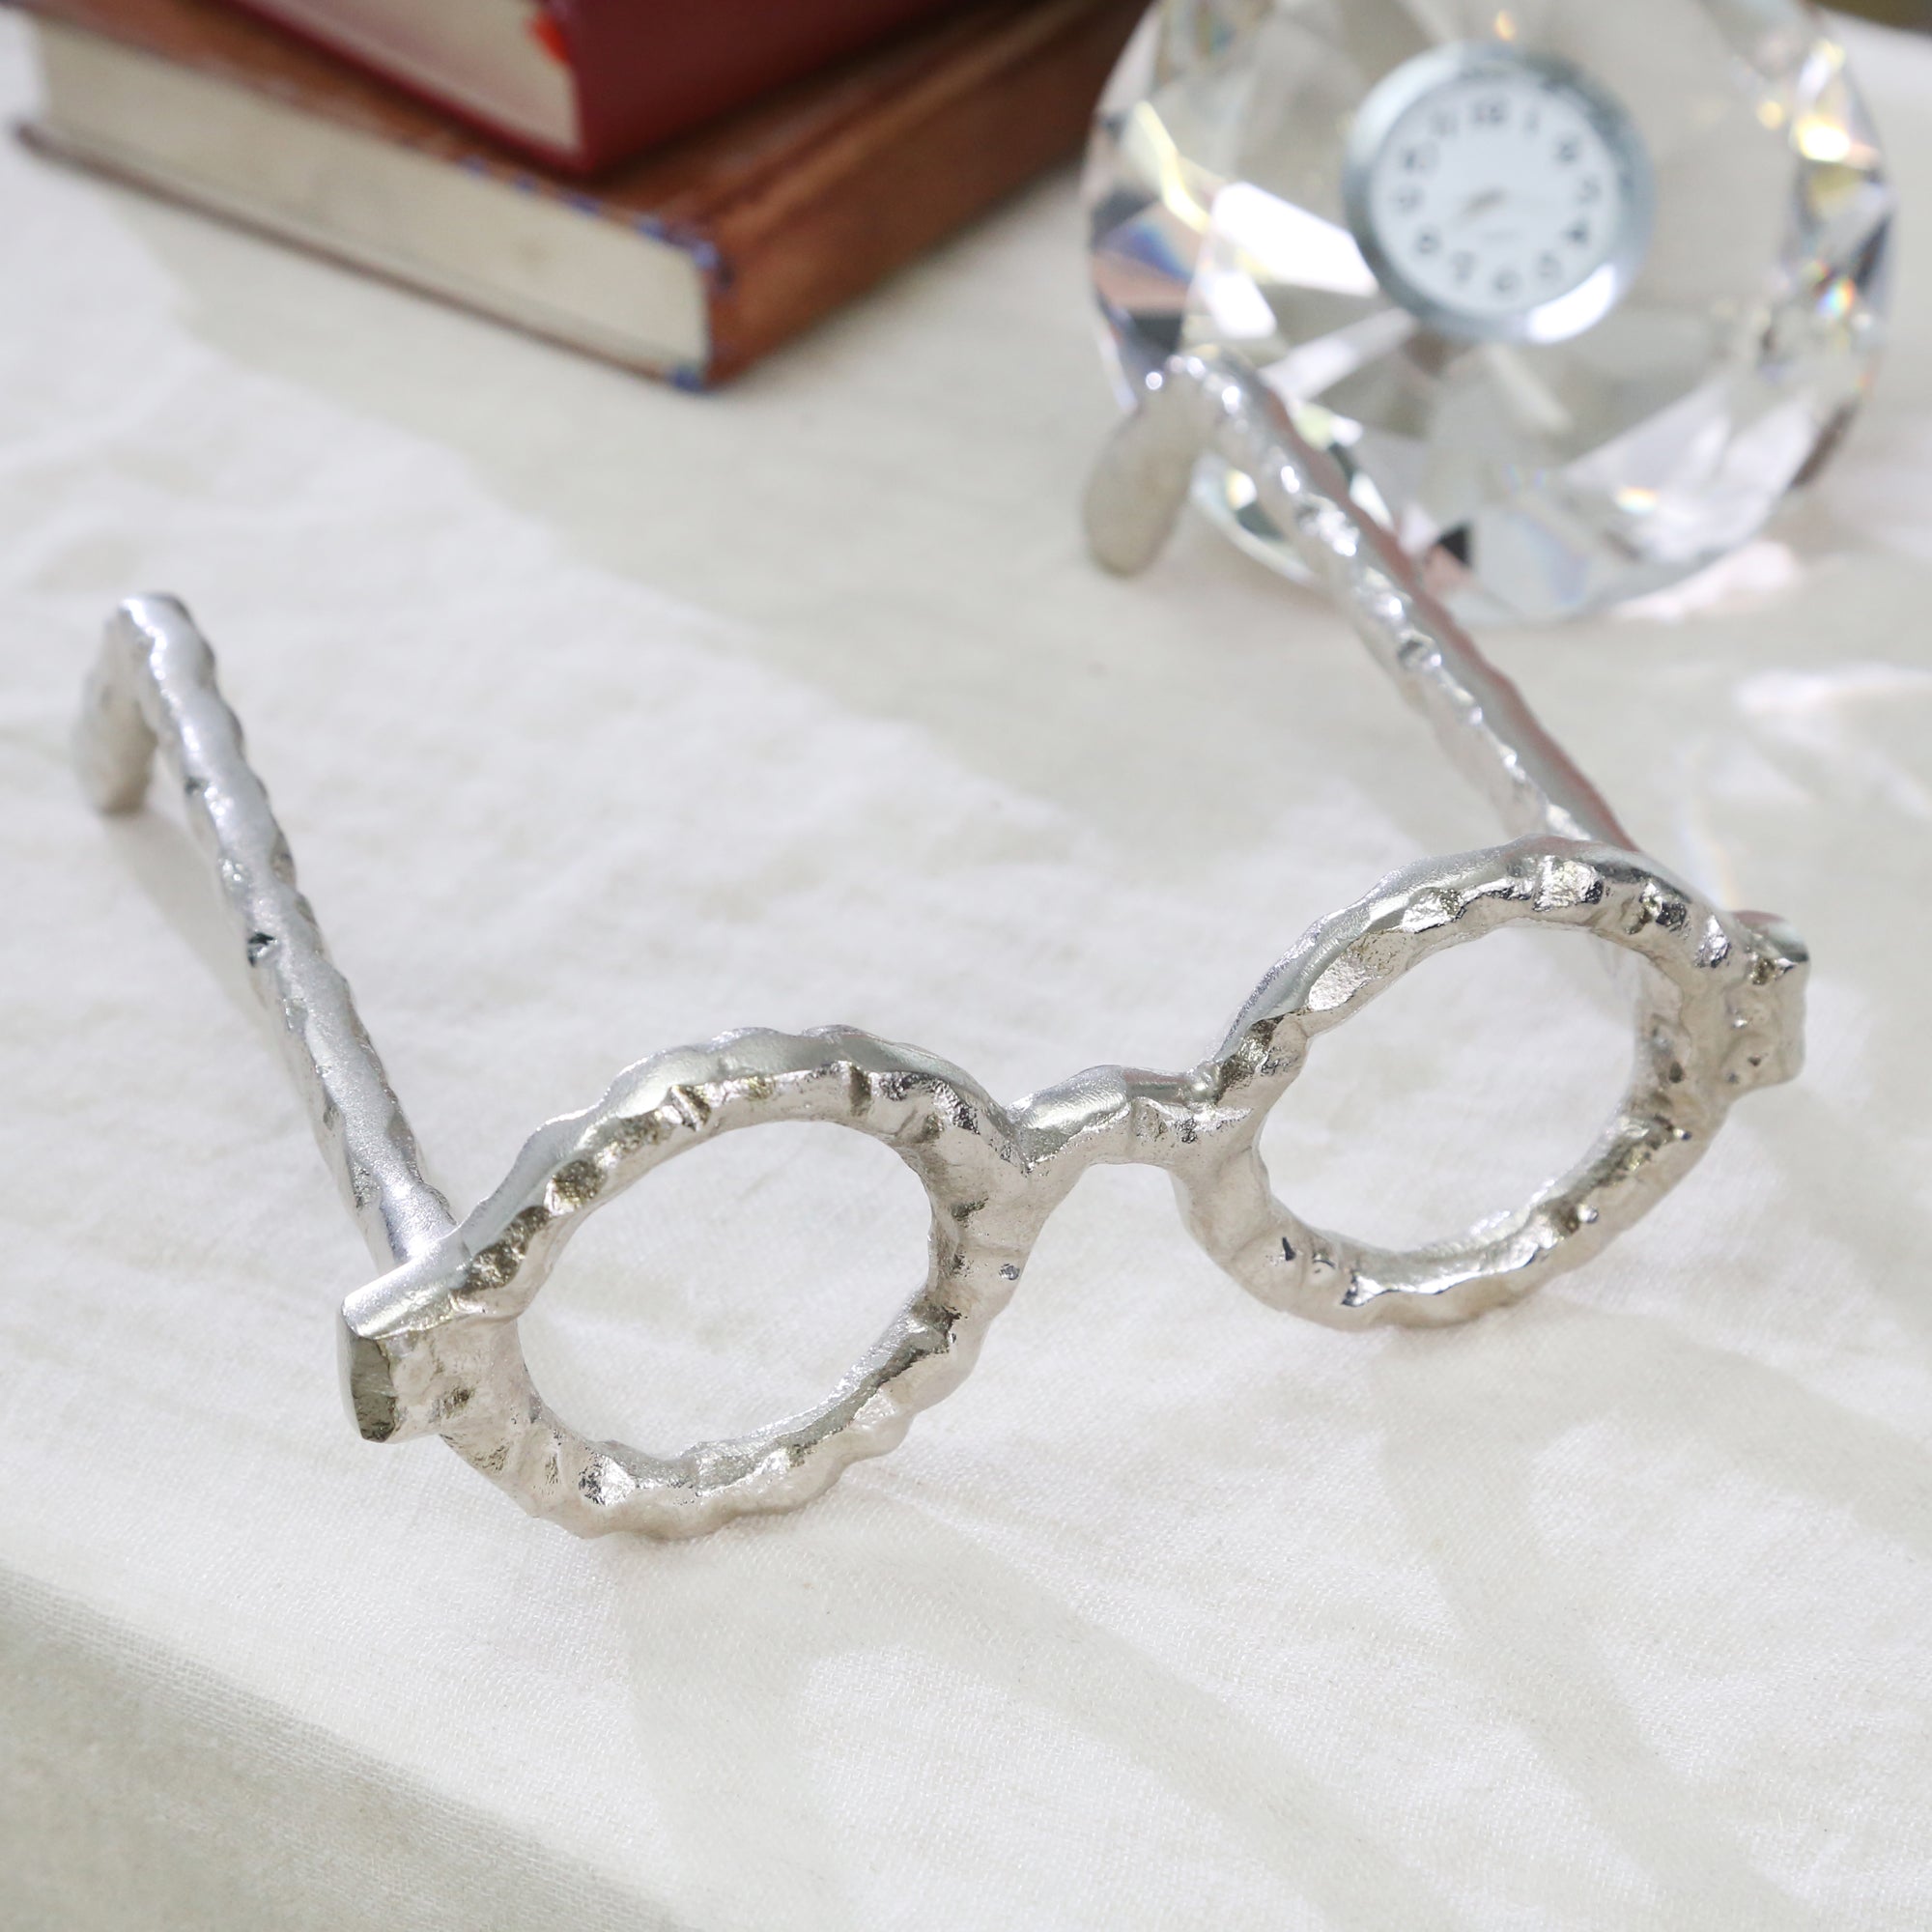 Glasses Sculpture, Silver, Decorative Objects